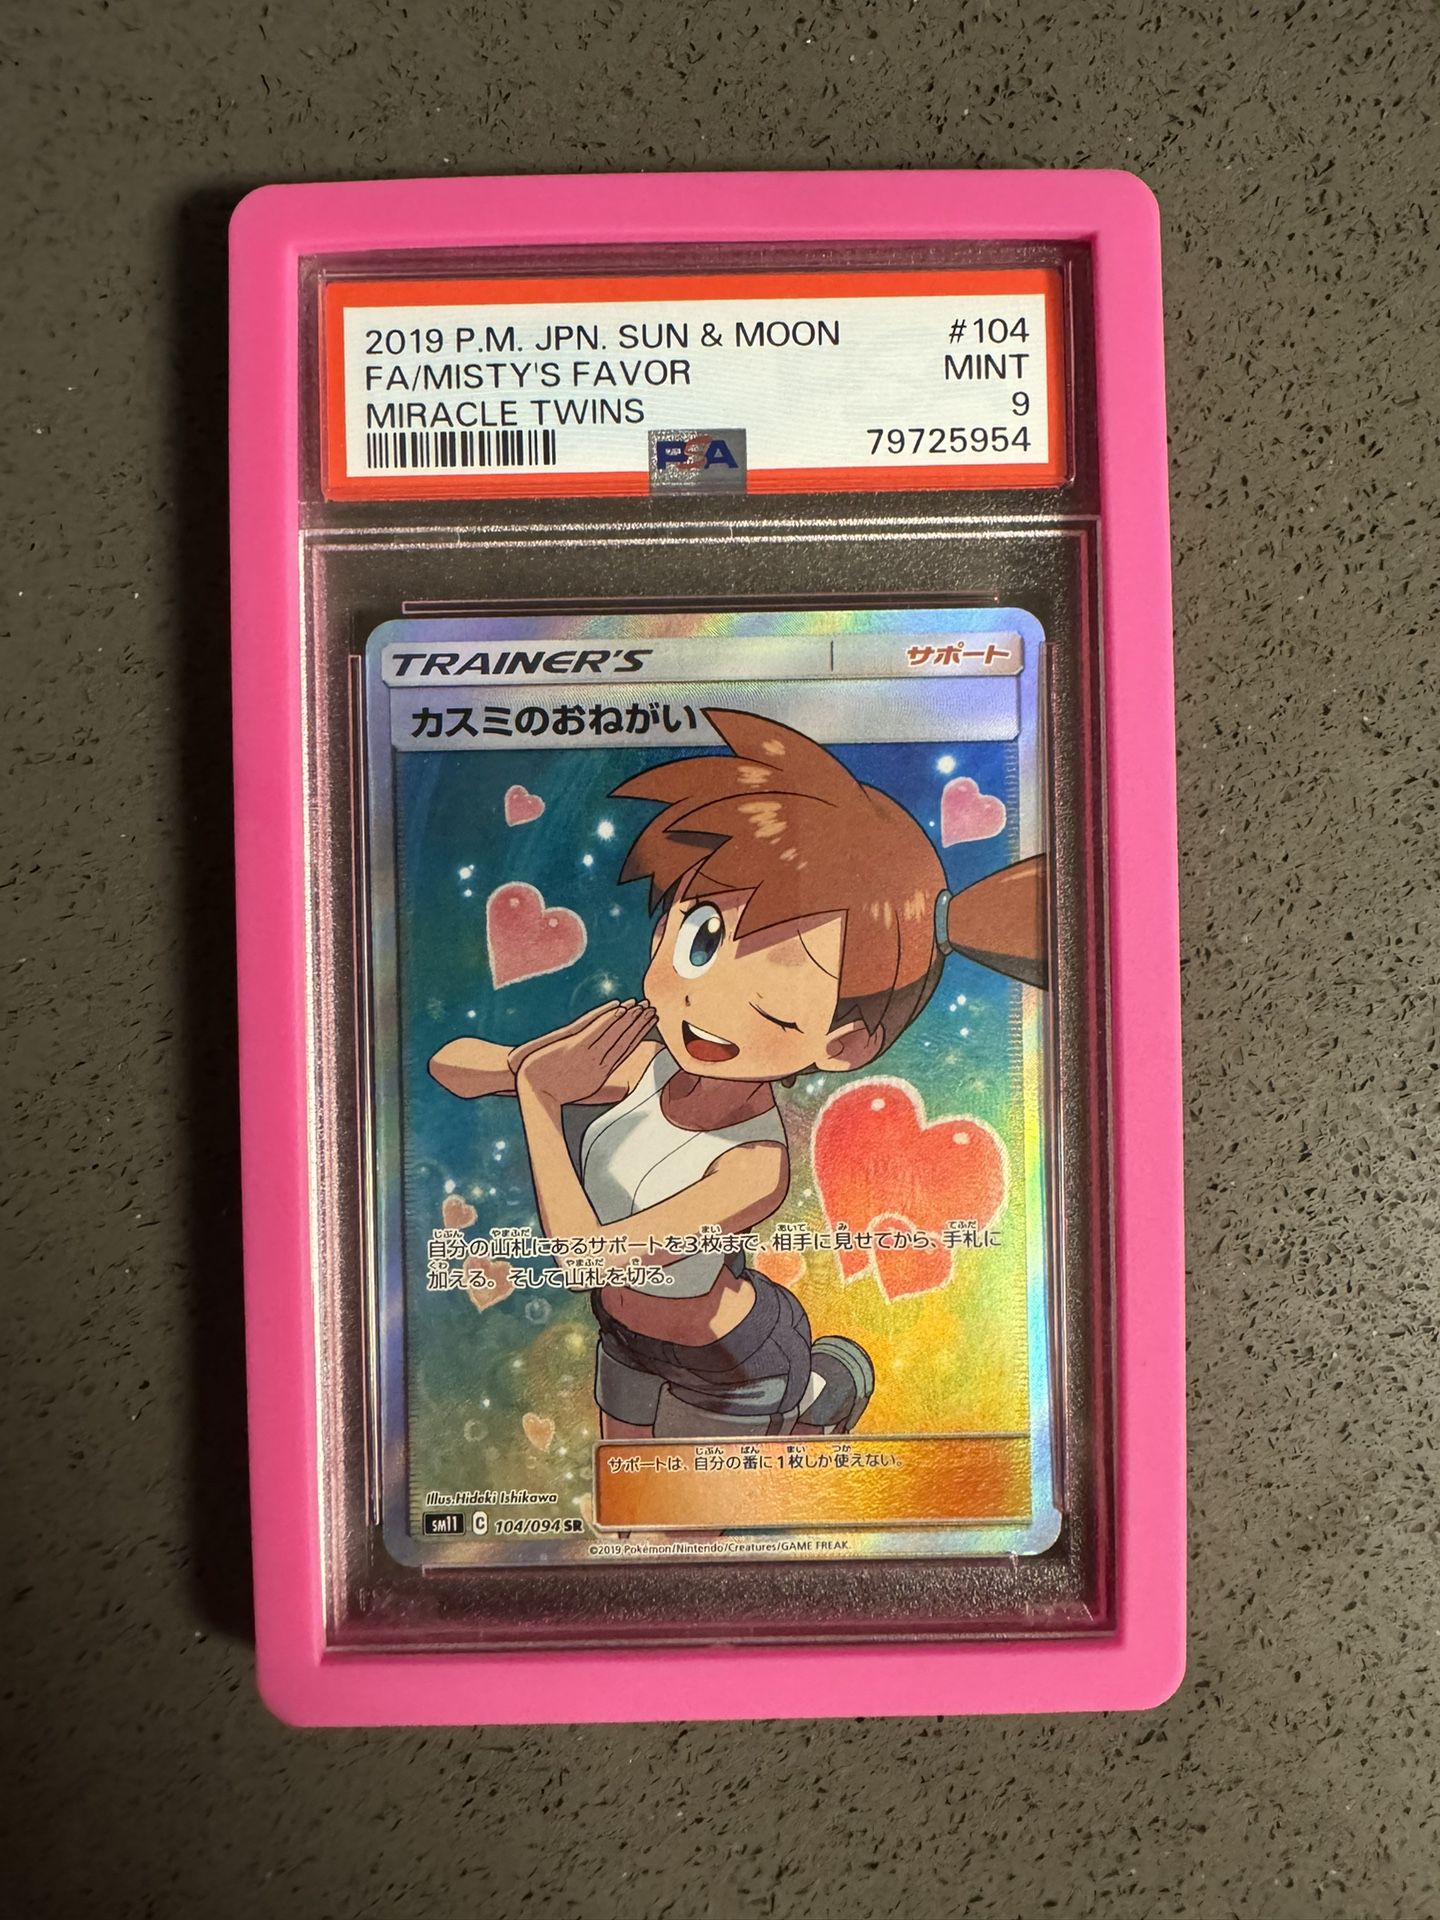 Misty’s Favor PSA 9 Japanese Miracle Twin